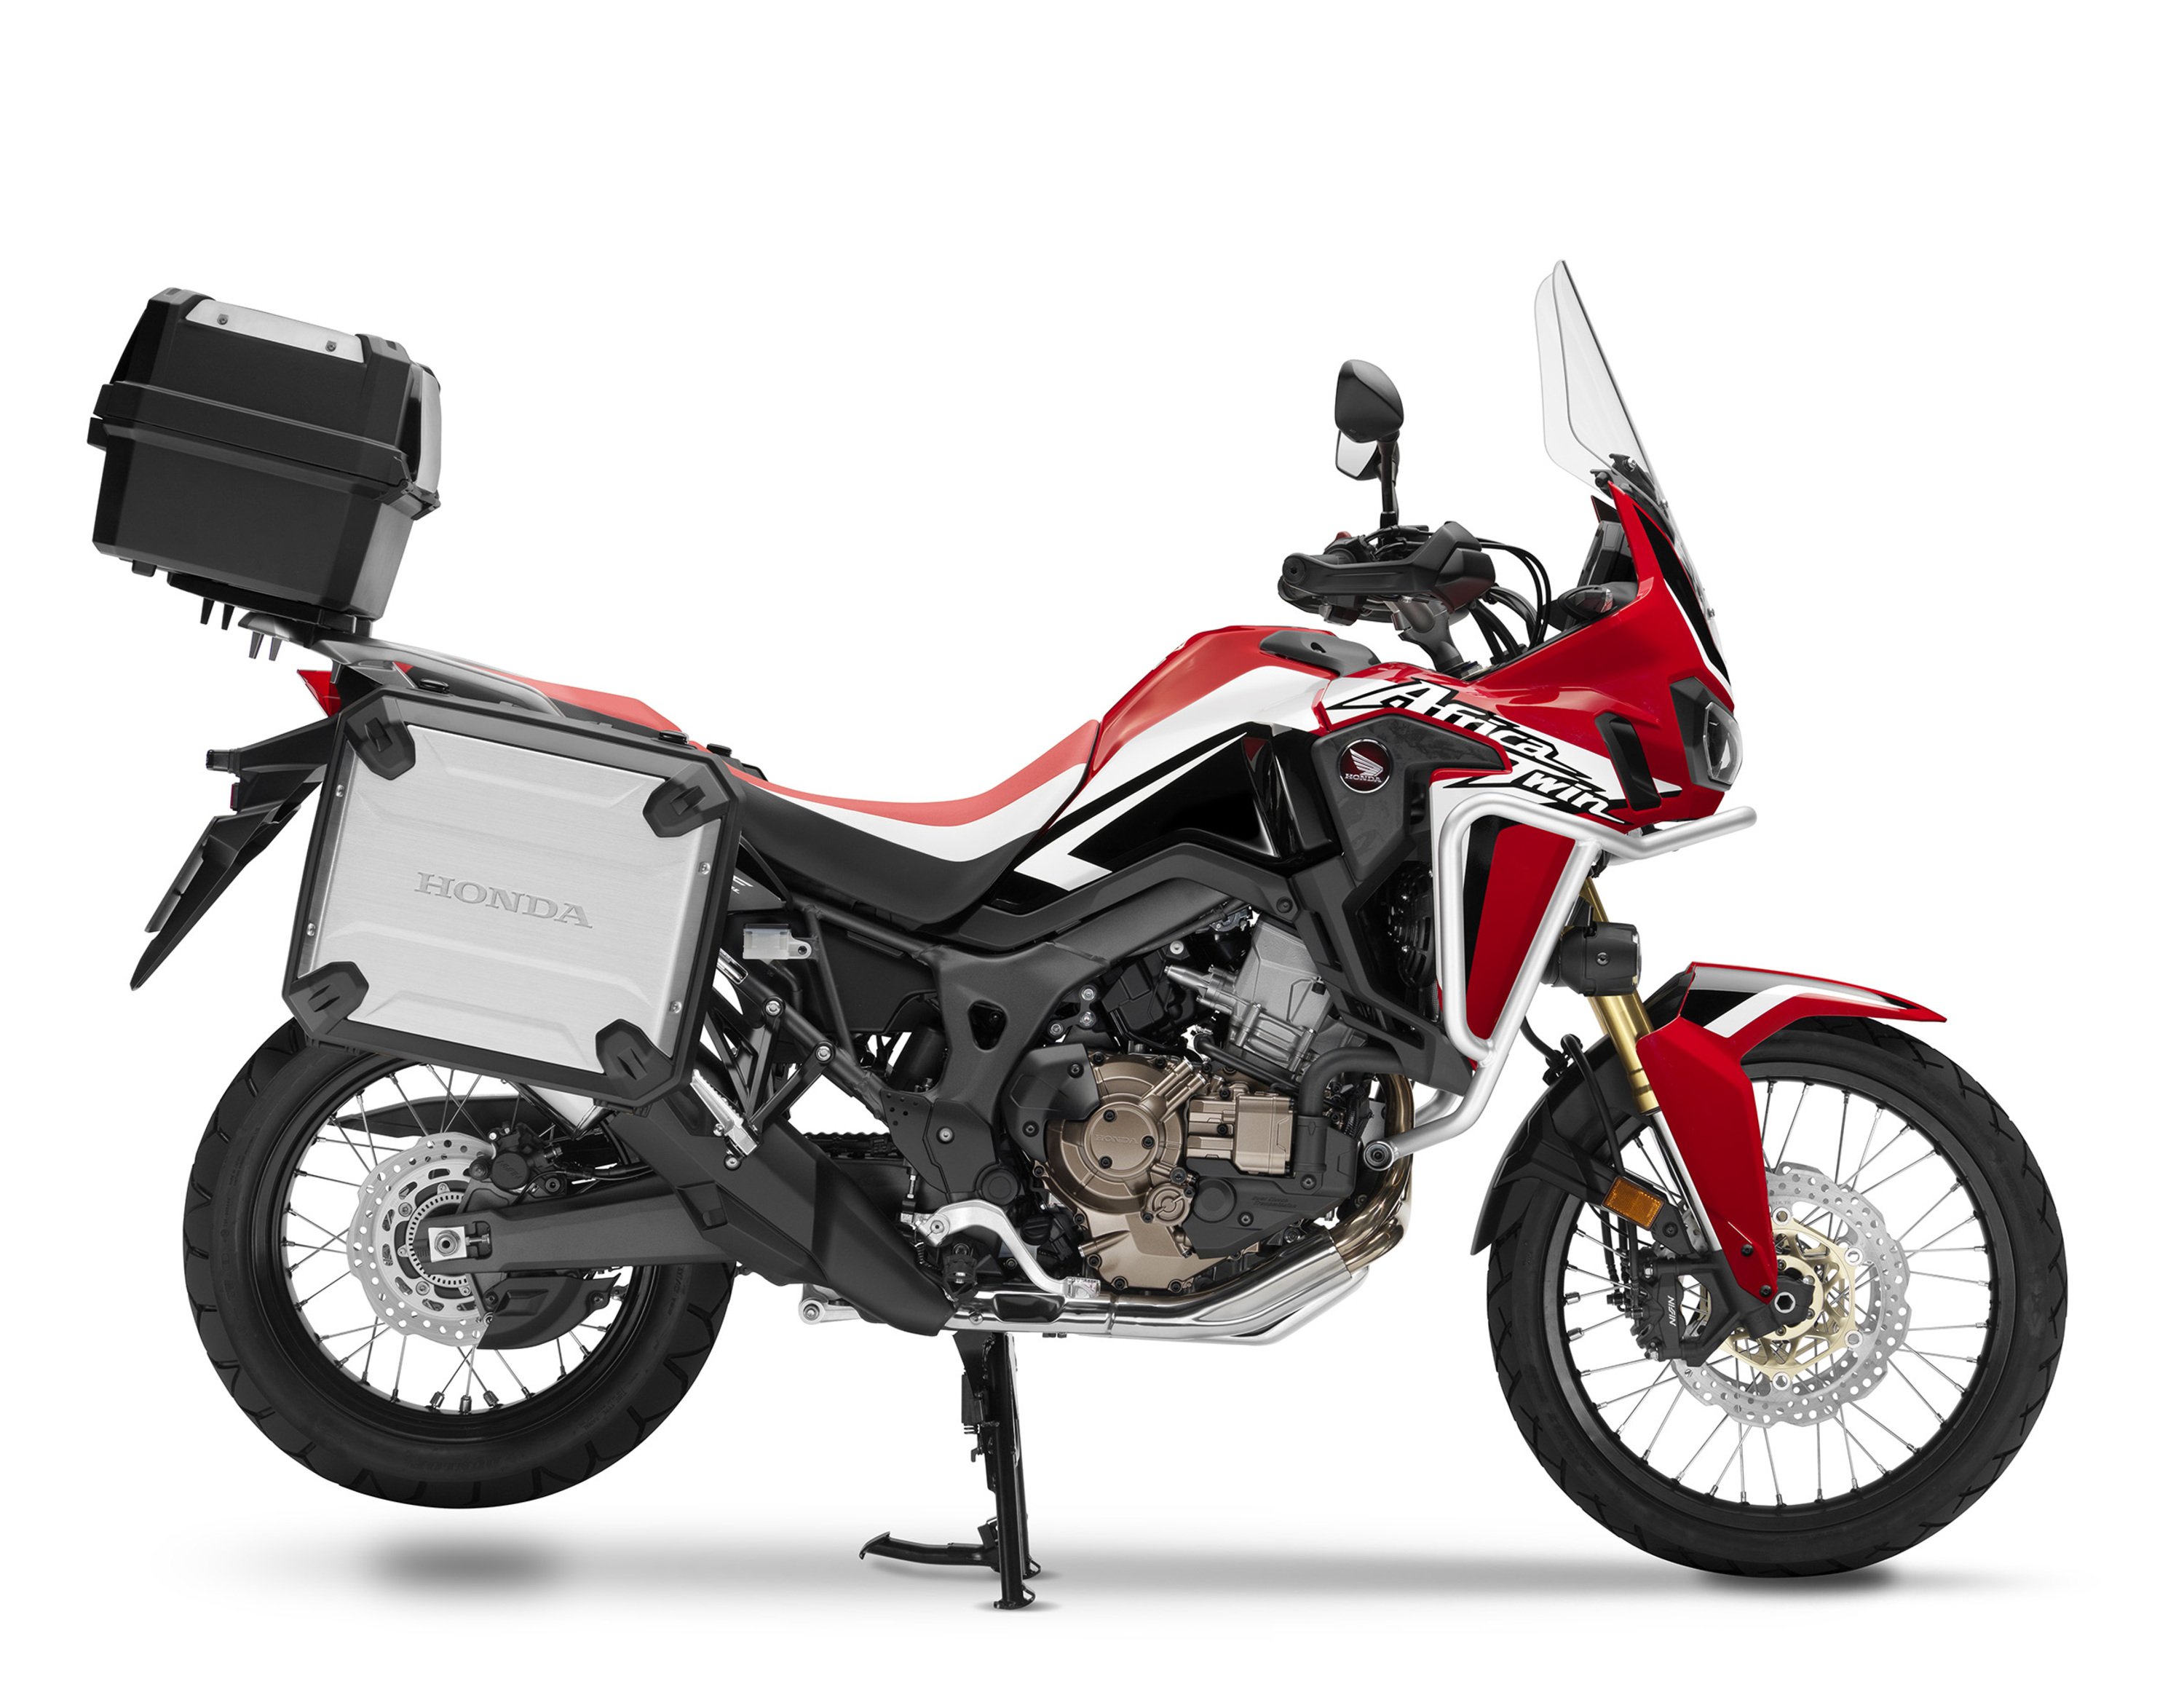 Honda Africa Twin CRF 1000L Africa Twin CRF 1000L DCT ABS Travel Edition (2016 - 17)